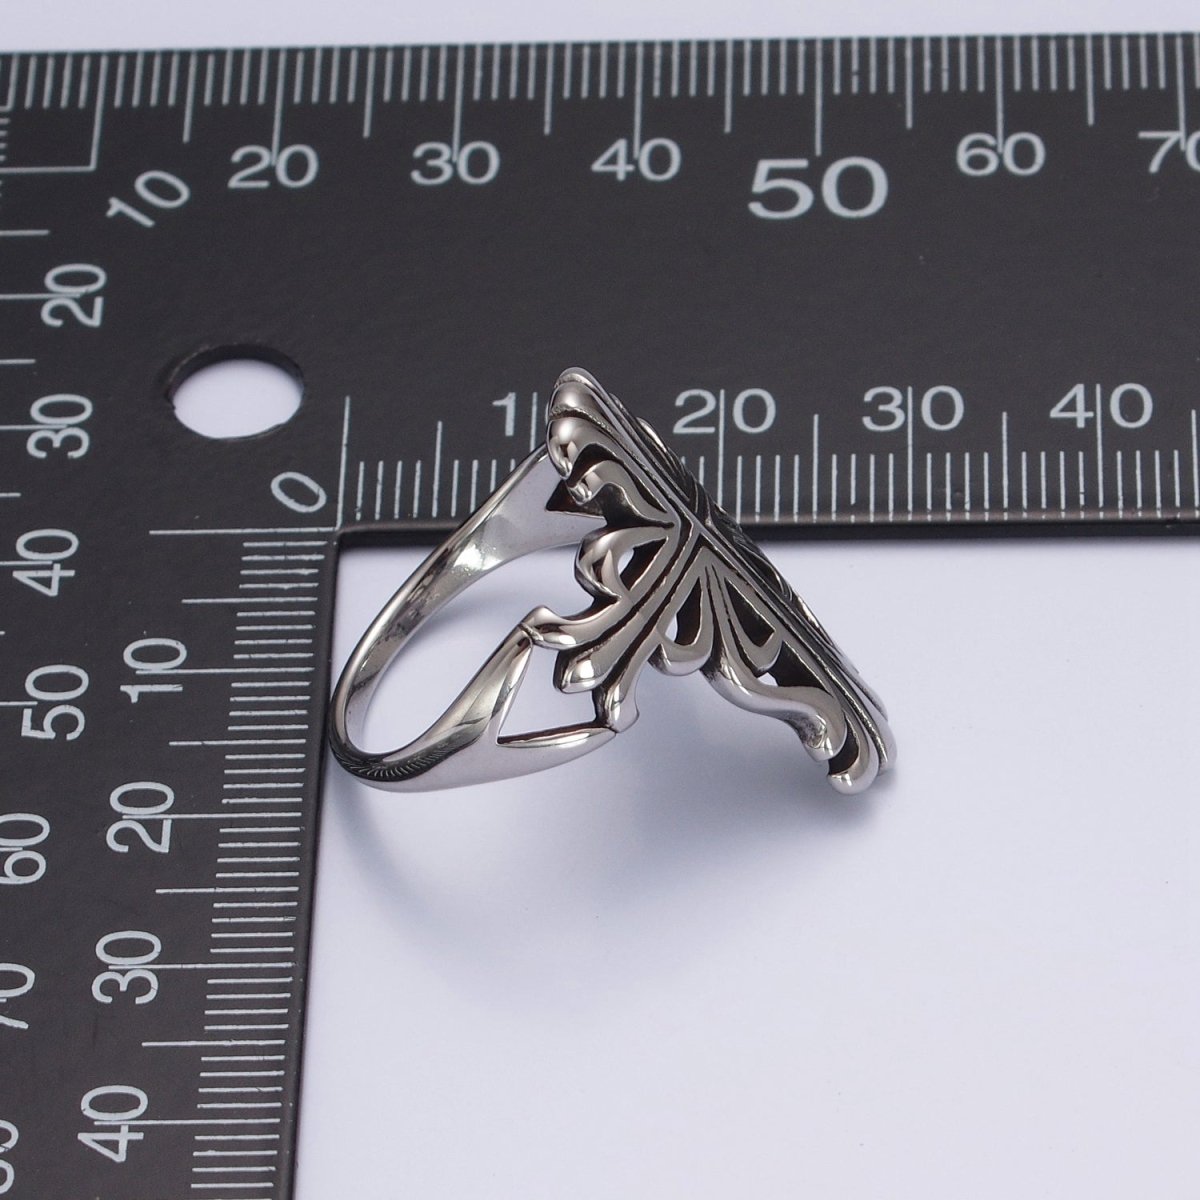 Rustic Cross Ring for Men Stainless Steel Ring Victorian Cross Inspired Chunky Ring O-856 O-857 - DLUXCA